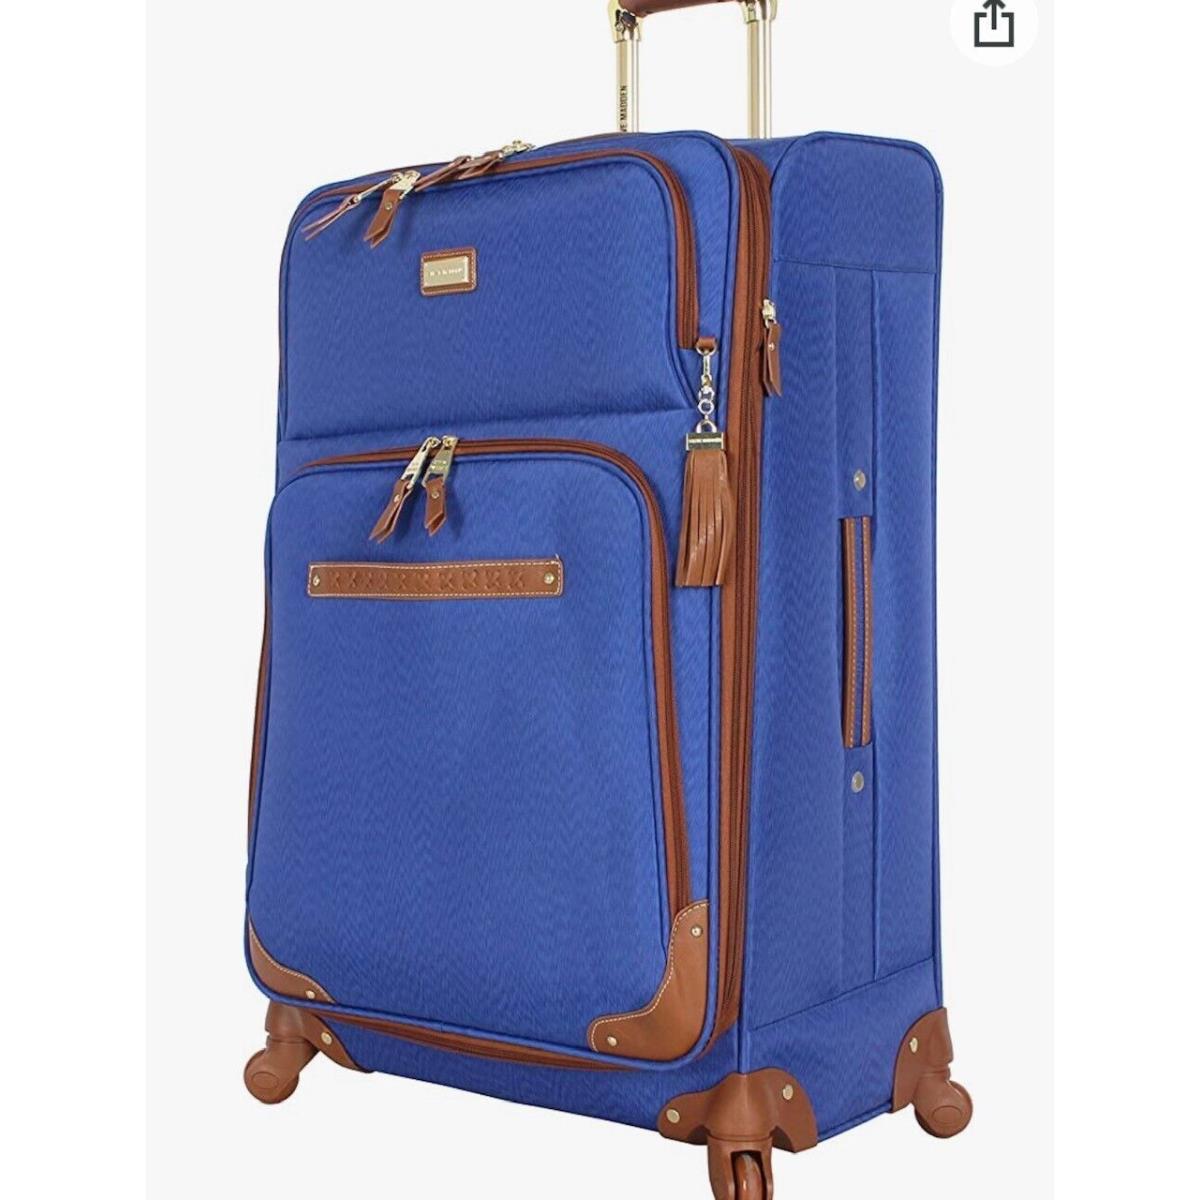 4PC Steve Madden Spinner Global Collection Luggage Set Blue